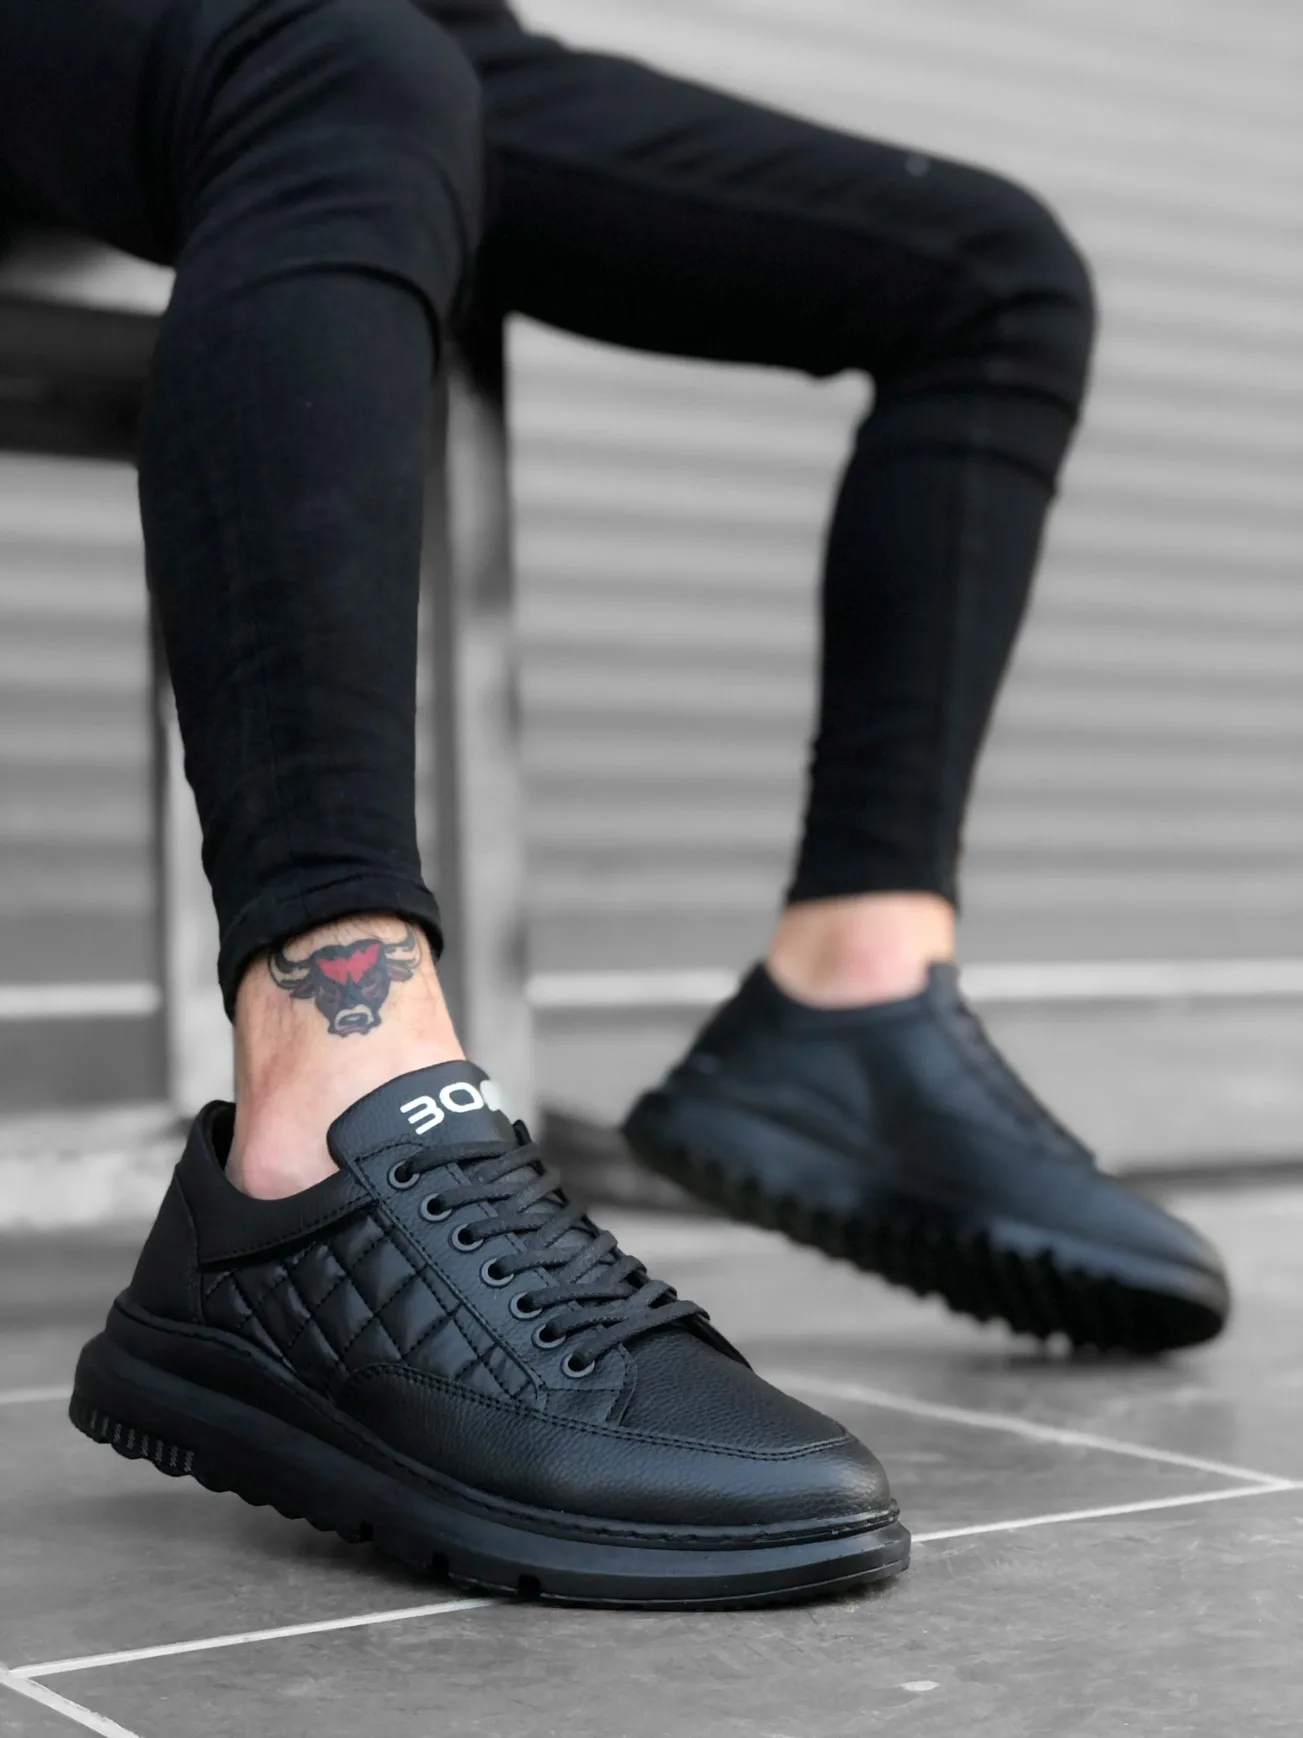 

BOA Causal Men Shoes Black Color Quilted Embossed High Outsole Lace-Up Stylish Original Design Brand New Model Summer Fall BA0180